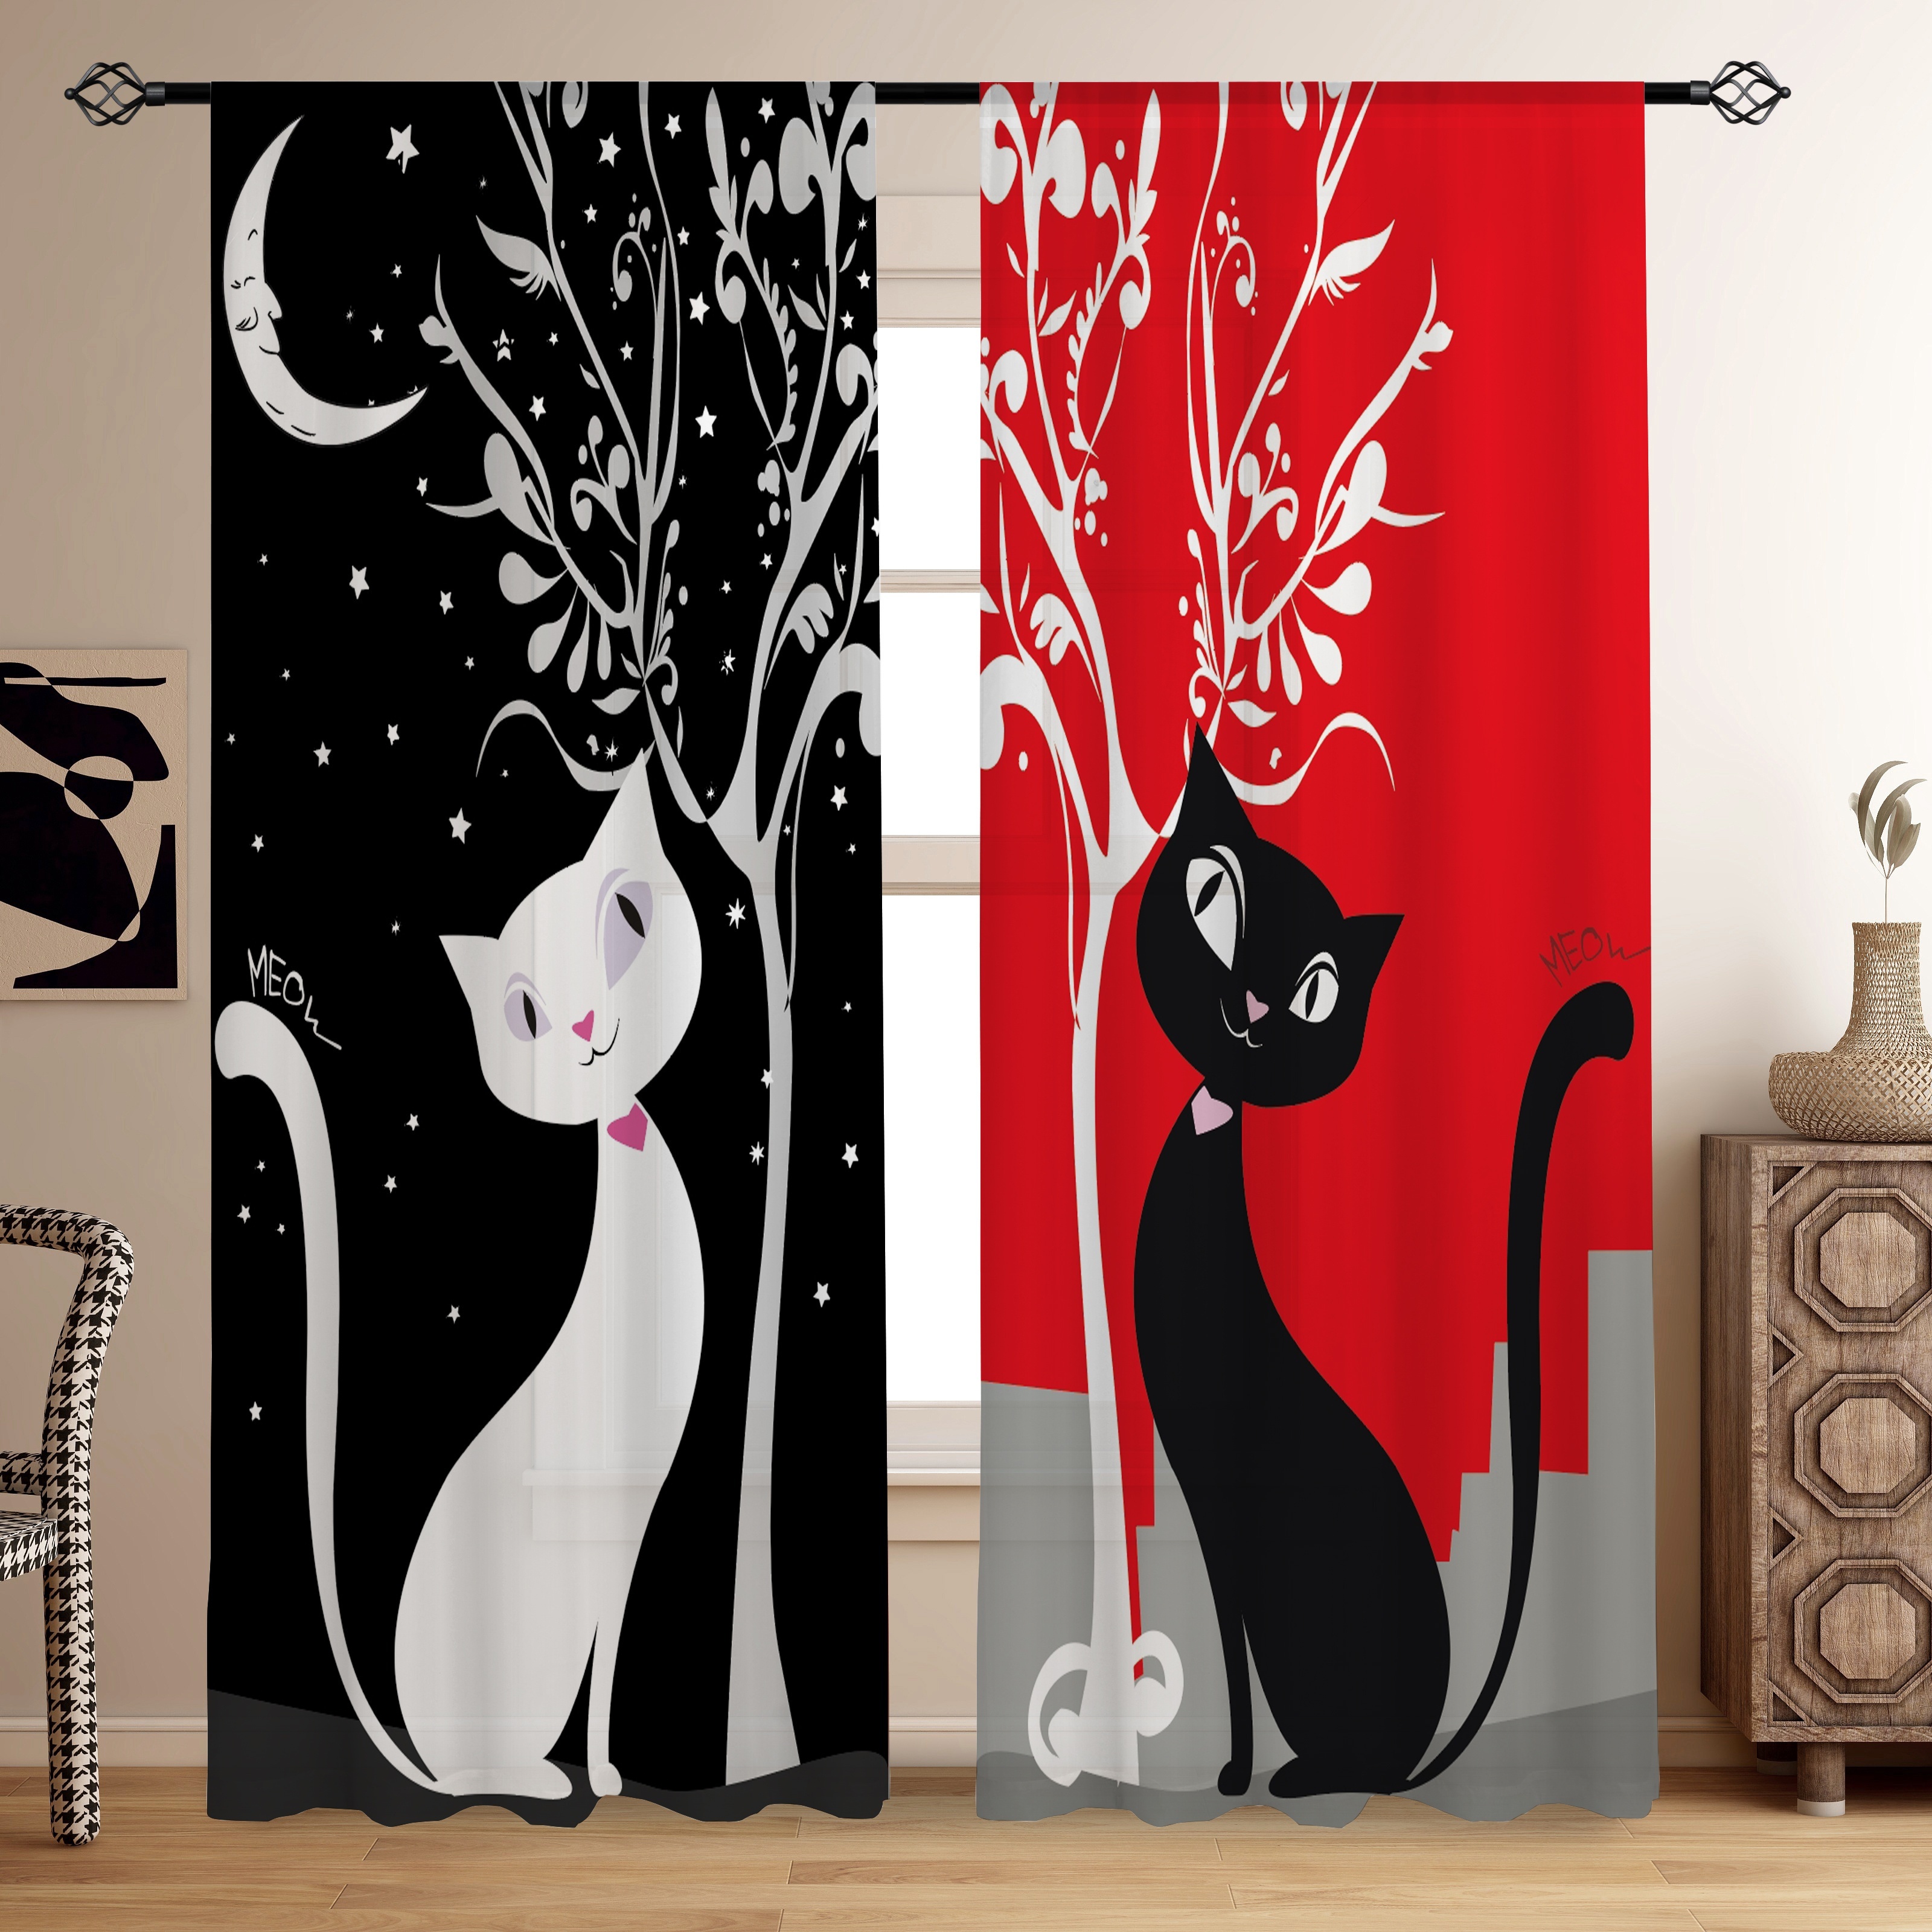 

2pcs, Valentine's Day Black And White Cat Black And Red Base Printed Translucent Curtains, Multi-scene Polyester Rod Pocket Decorative Curtains For Living Room Bedroom Home Decor Party Supplies